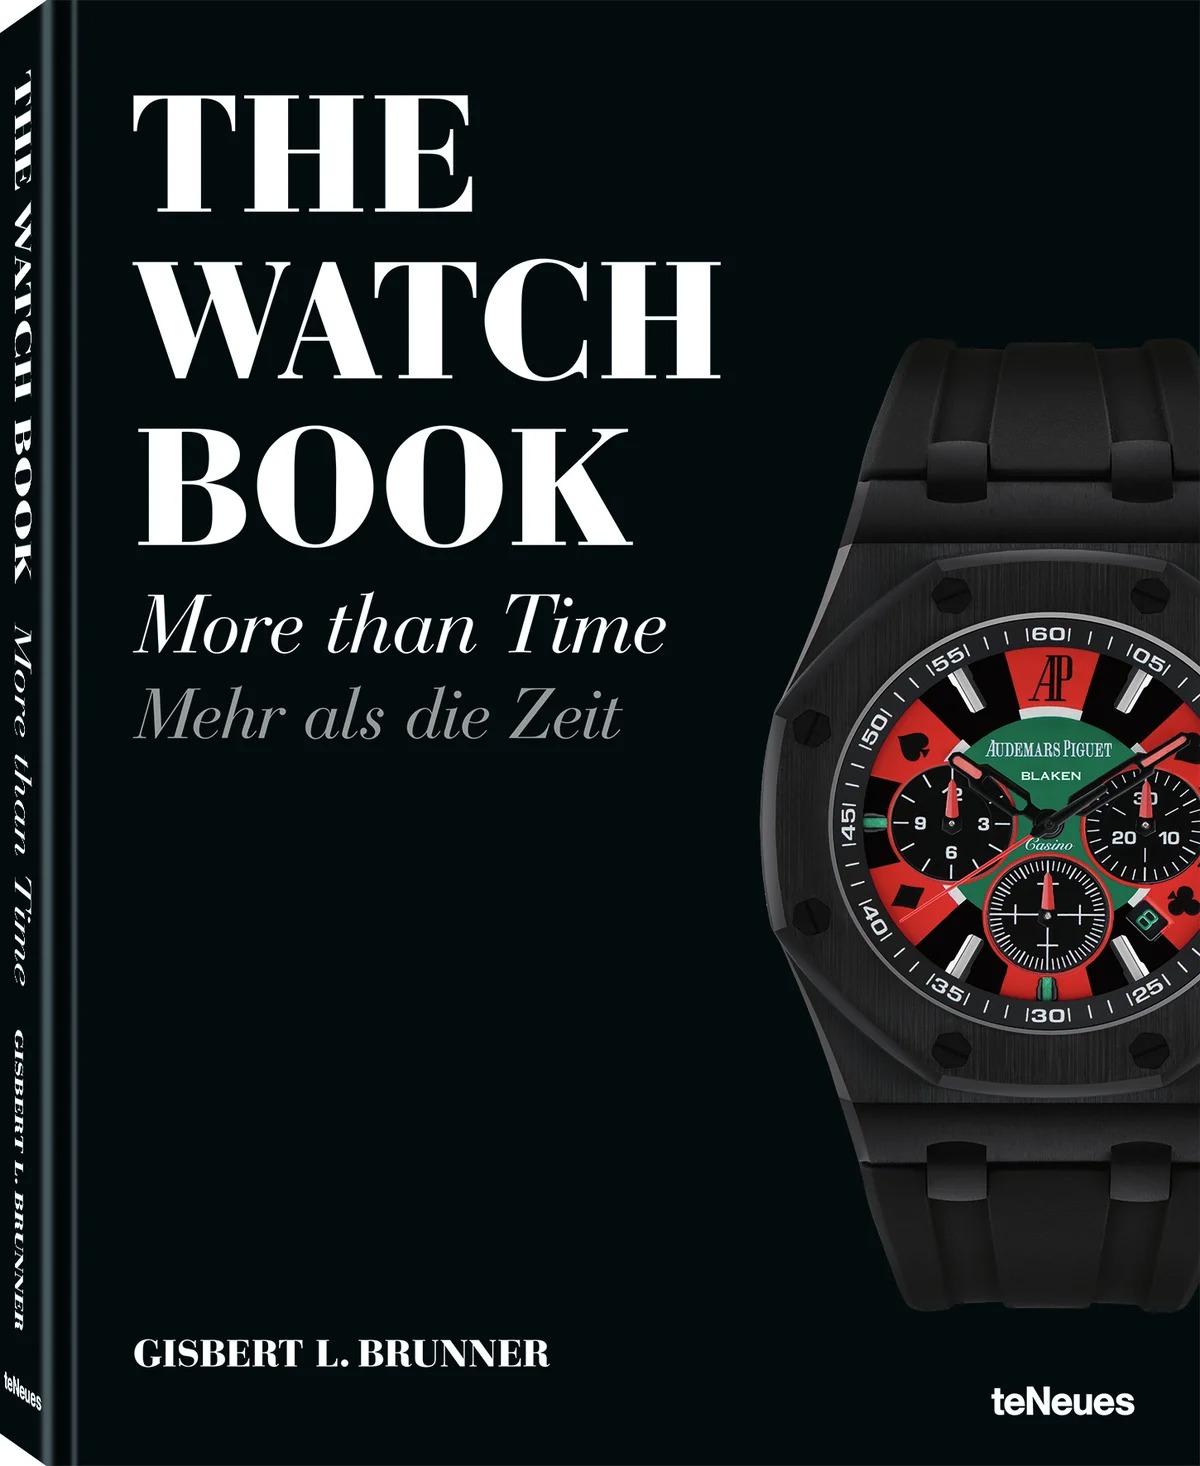 The Watch Book: More than time